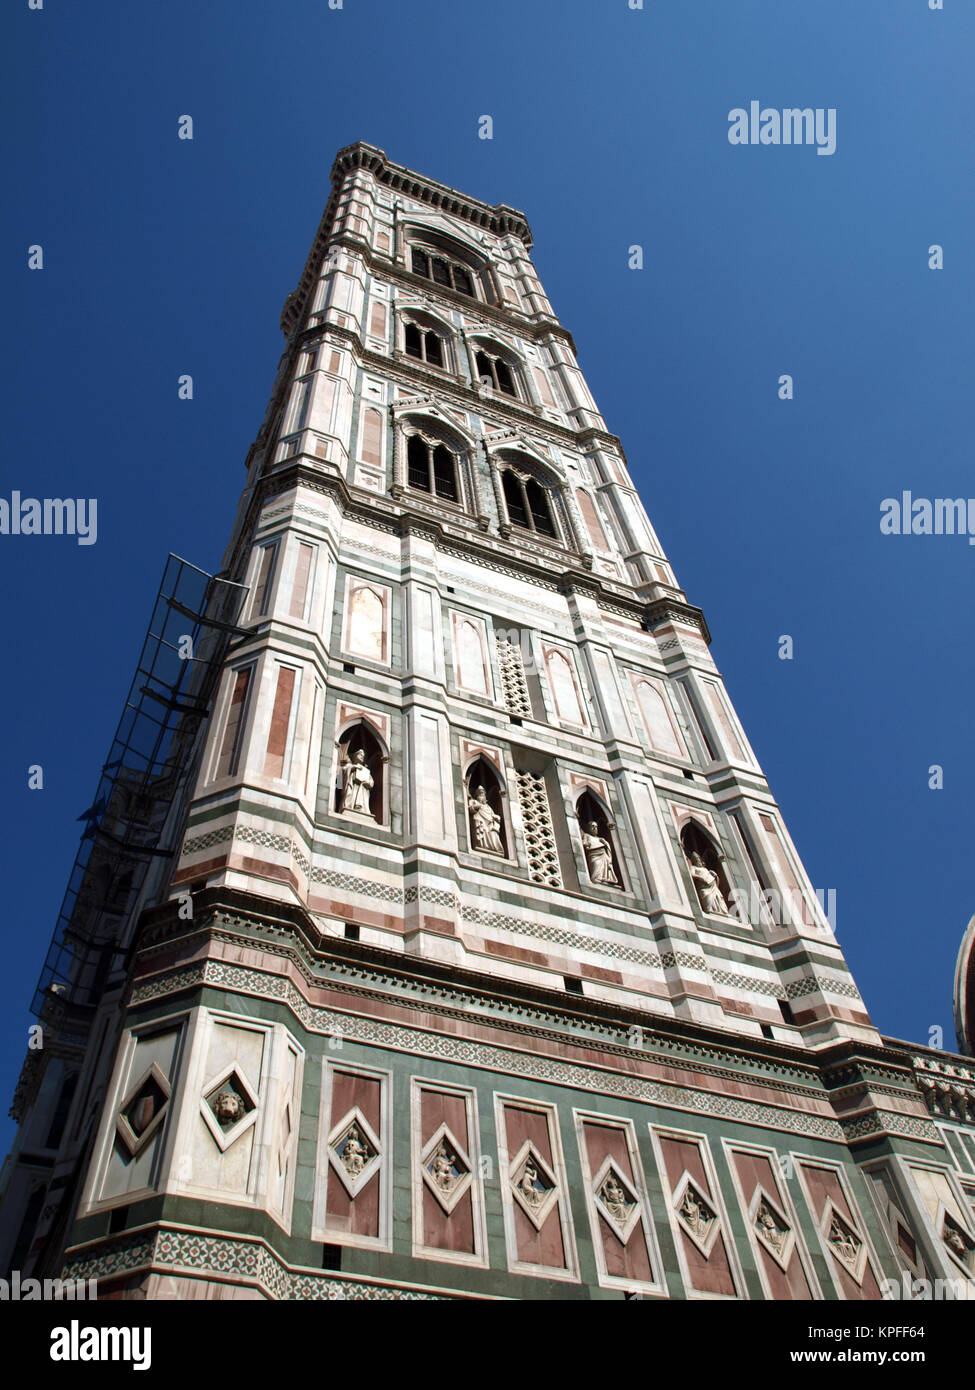 View of theGiotto's bell tower - Florence Stock Photo